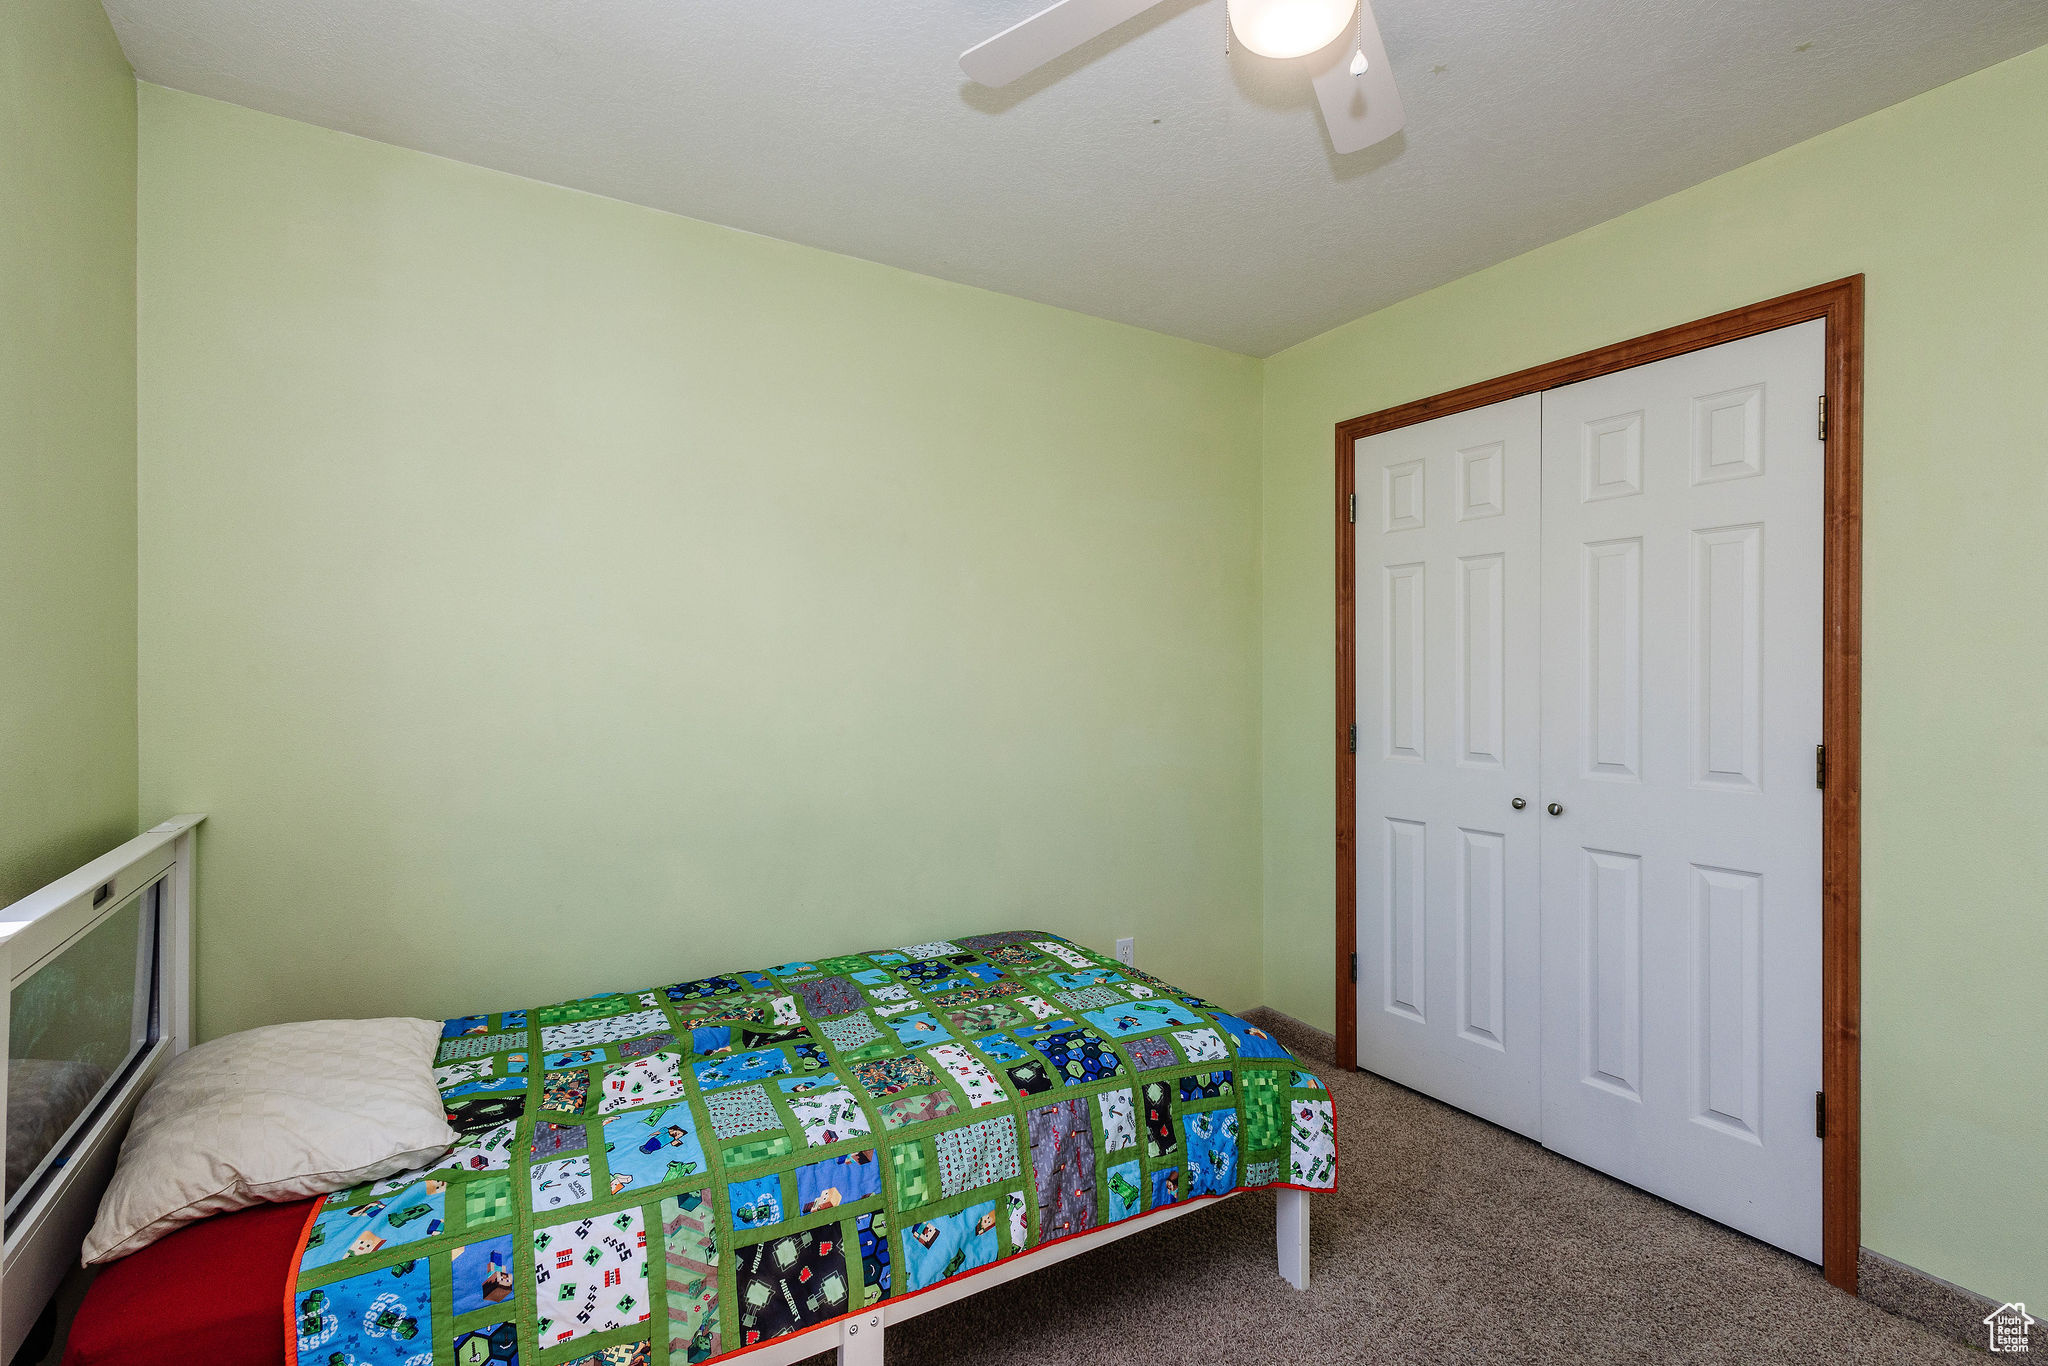 Bedroom with light colored carpet, ceiling fan, and a closet trimmed with oak wood stain.